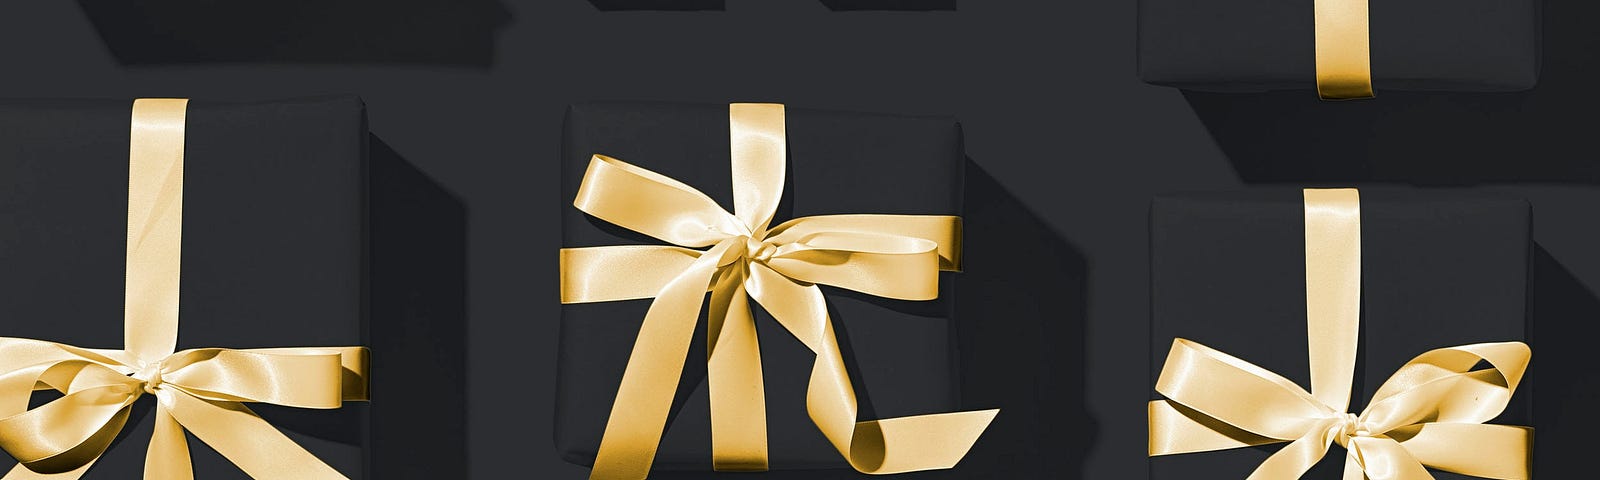 black gift boxes wrapped in gold ribbons